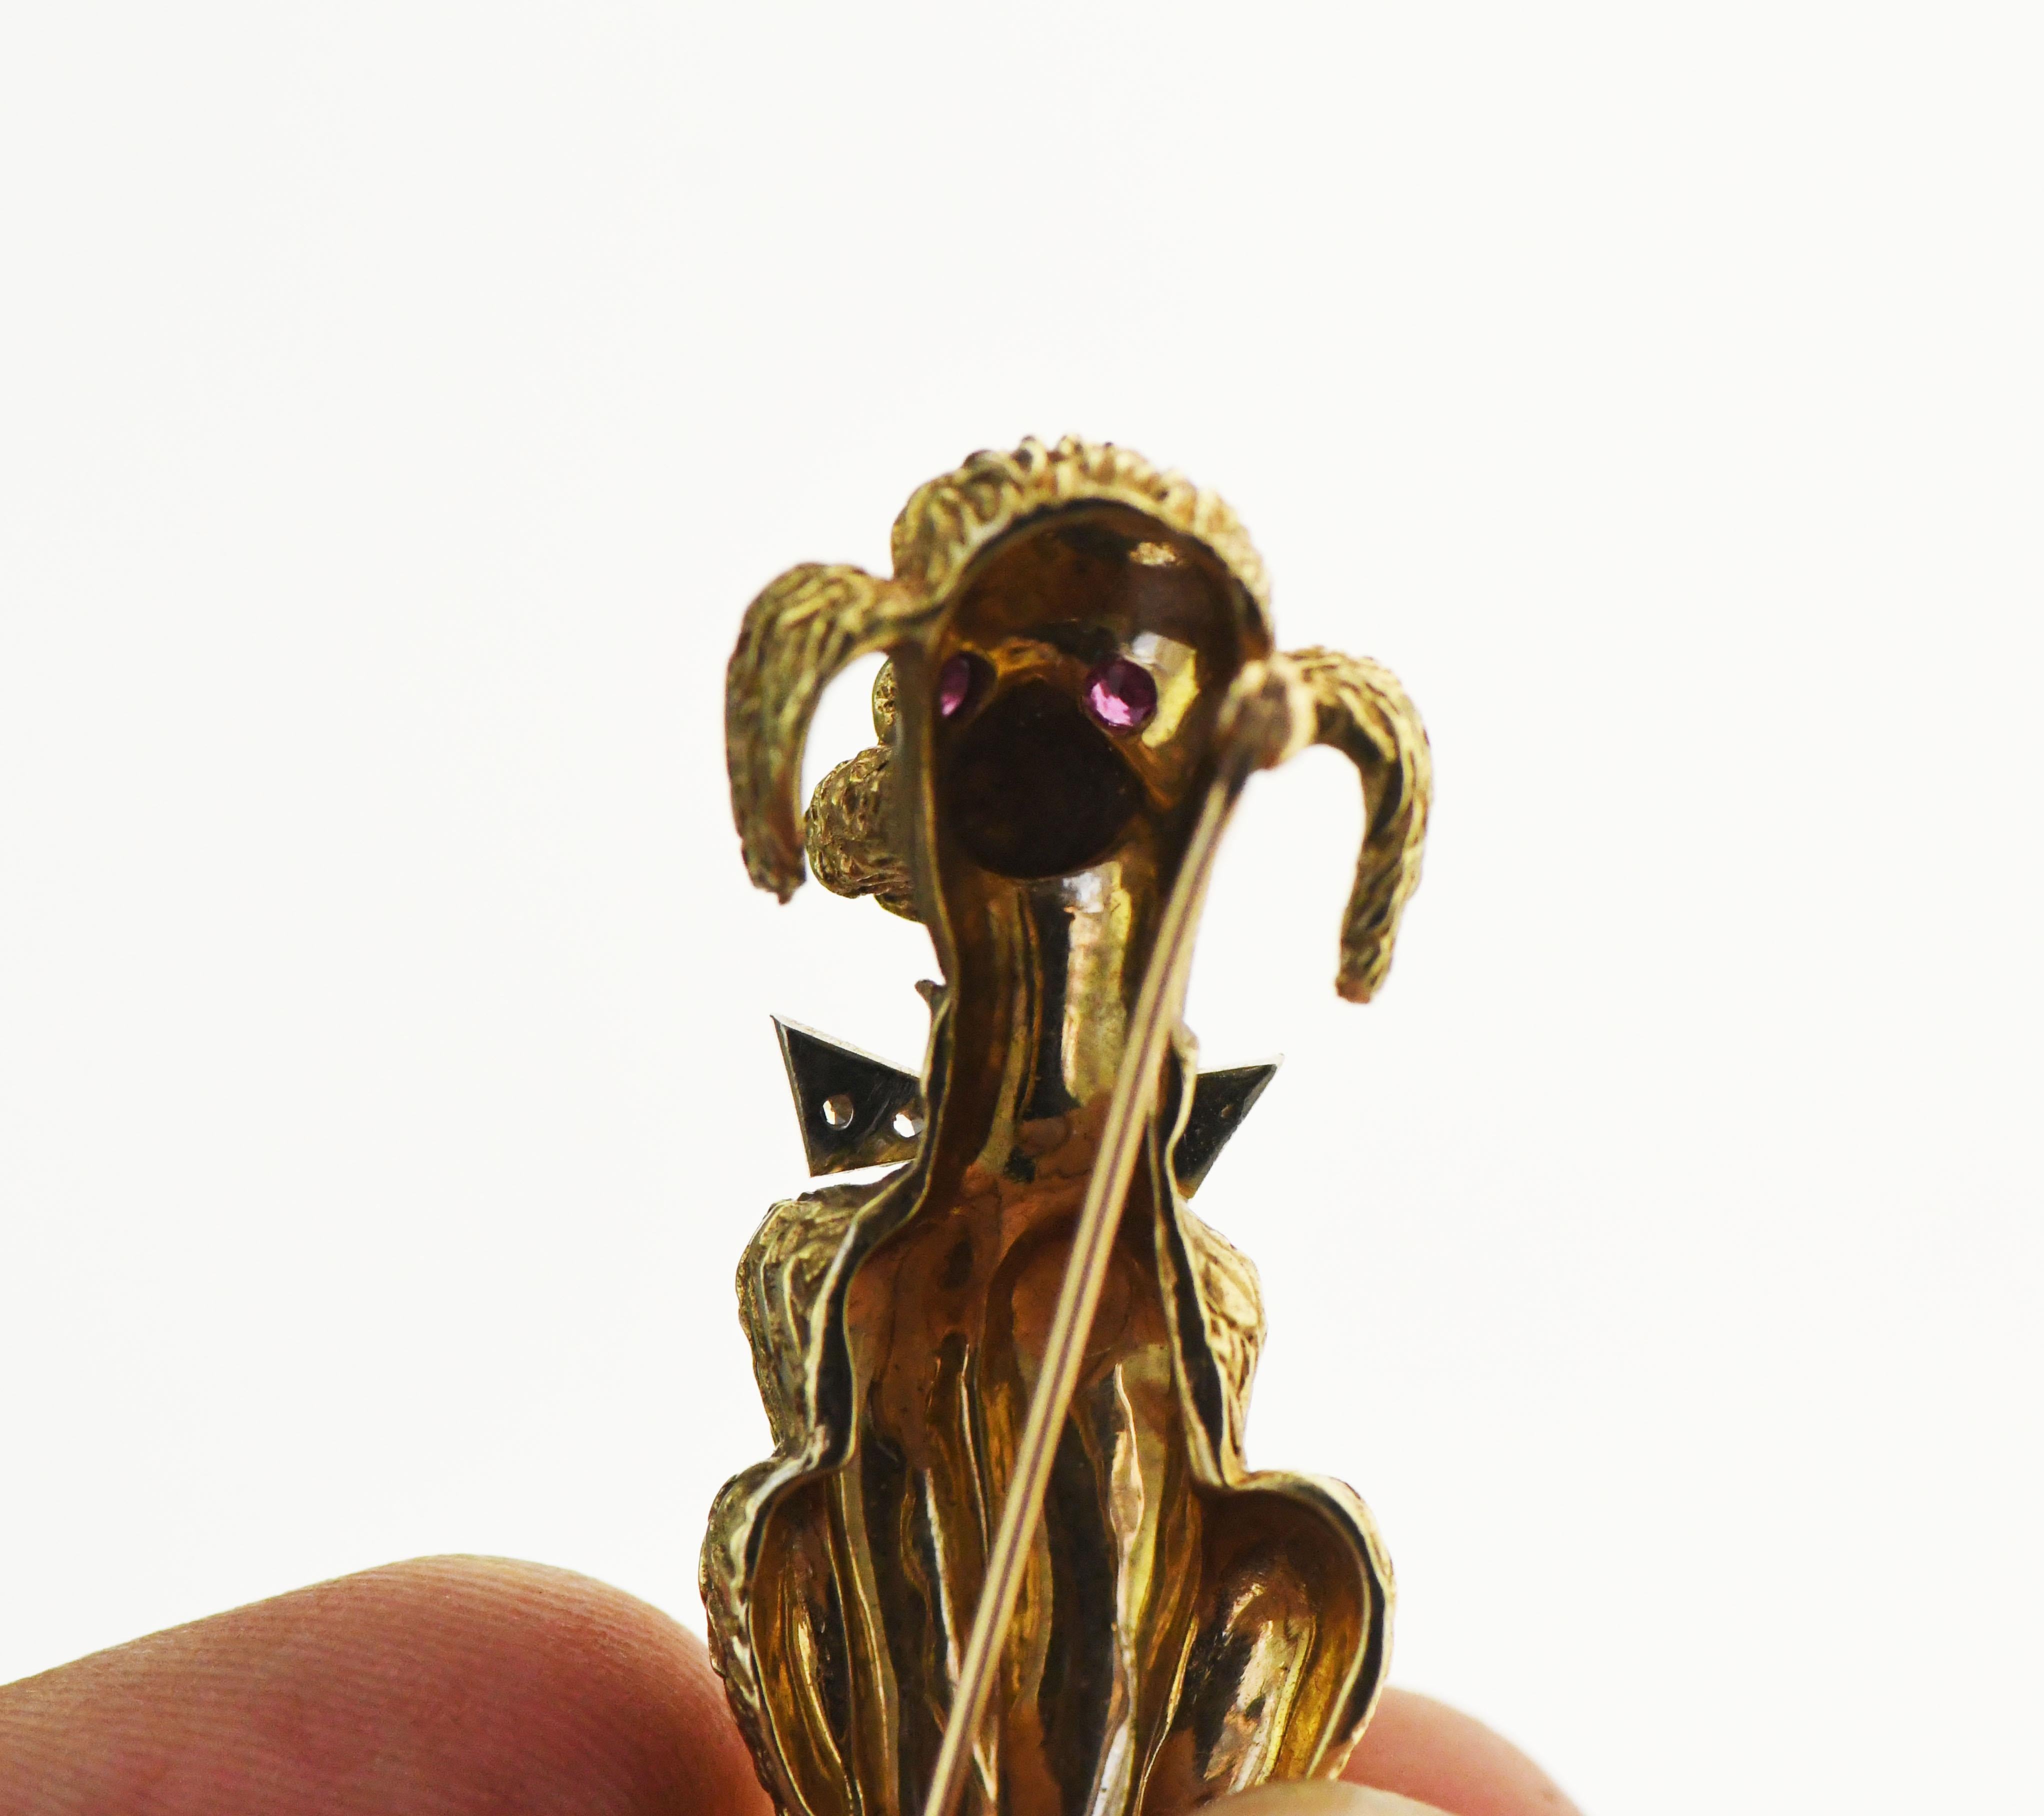 14k Yellow Gold Poodle Pin Pendant with Ruby Eyes and Diamond Bowtie. Nice and Heavy. The Diamonds are single cut. Size 2mm. The rubys are also 2mm. Piece is not marked but has been tested as 14k. has a stonger yellow like 18k but did not test as